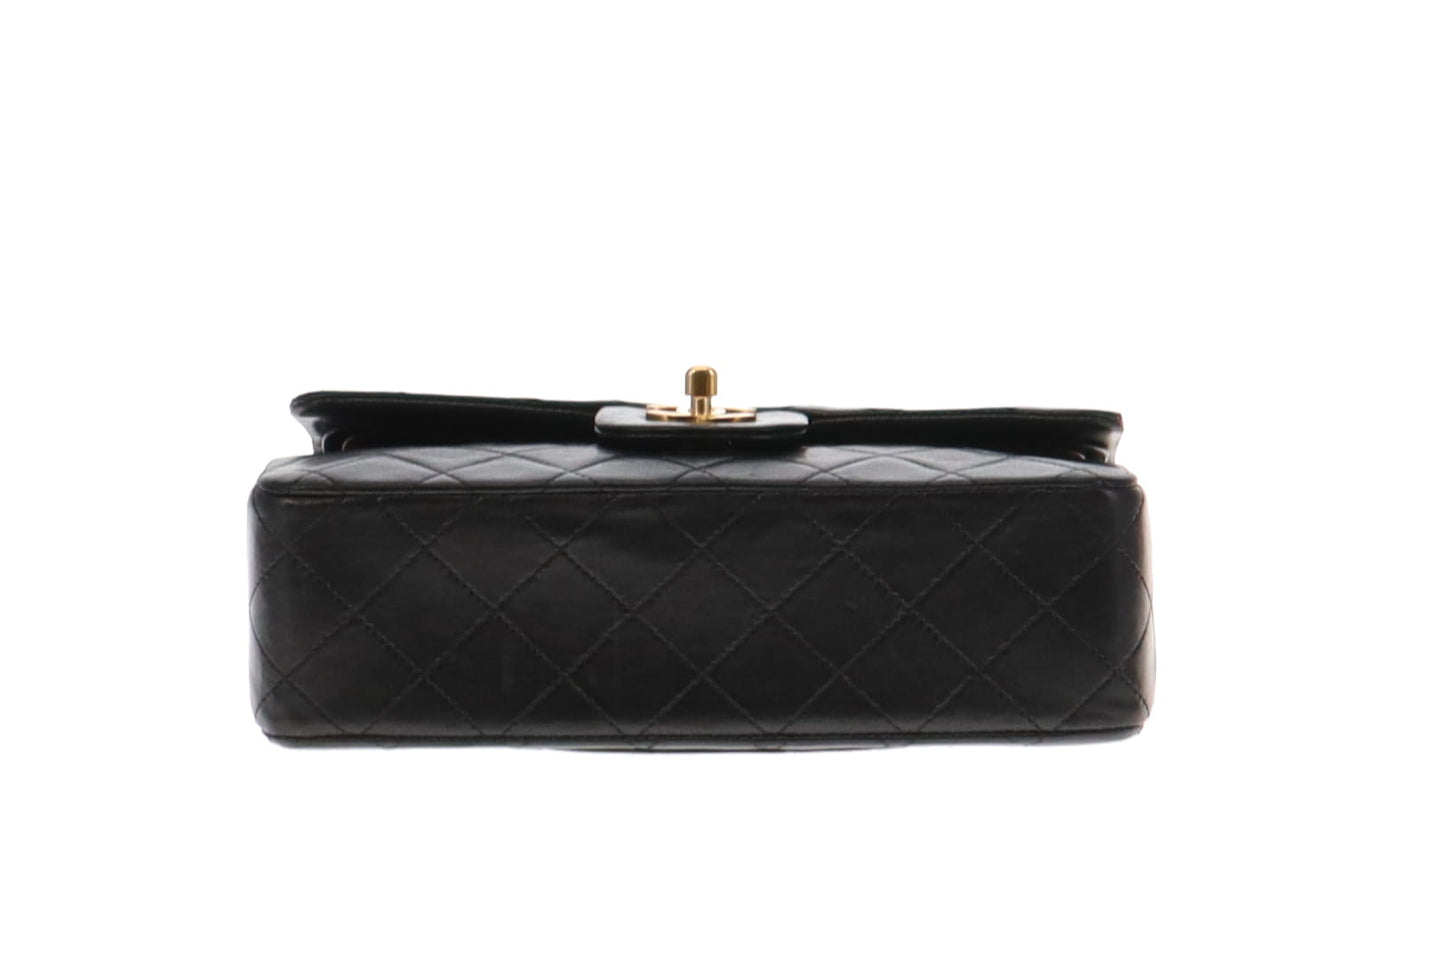 Chanel Small Black Classic Lambskin Double Flap Bag Vintage